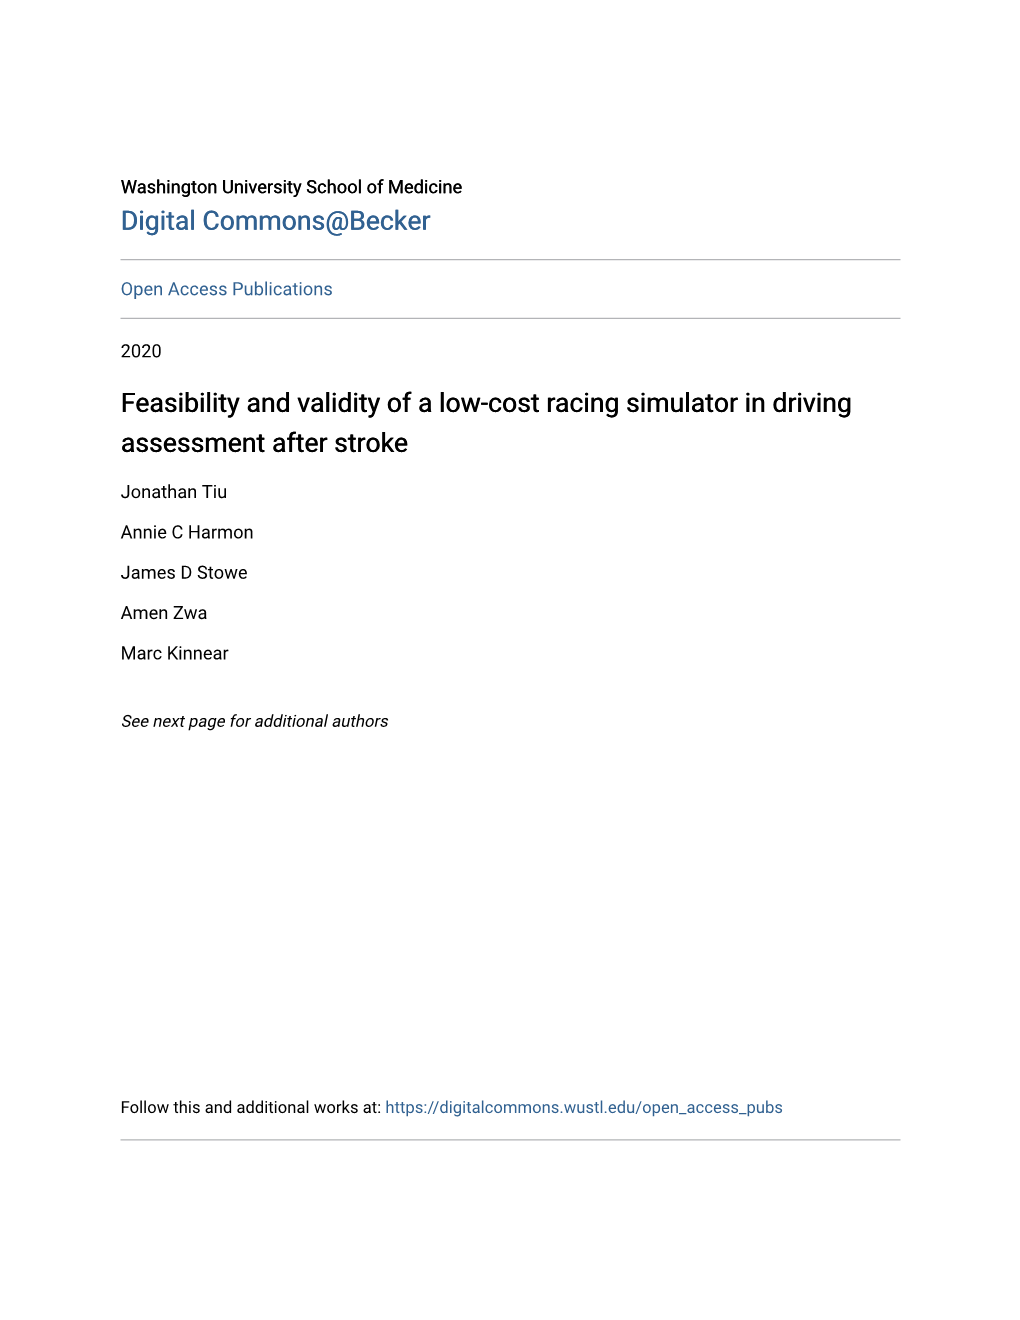 Feasibility and Validity of a Low-Cost Racing Simulator in Driving Assessment After Stroke